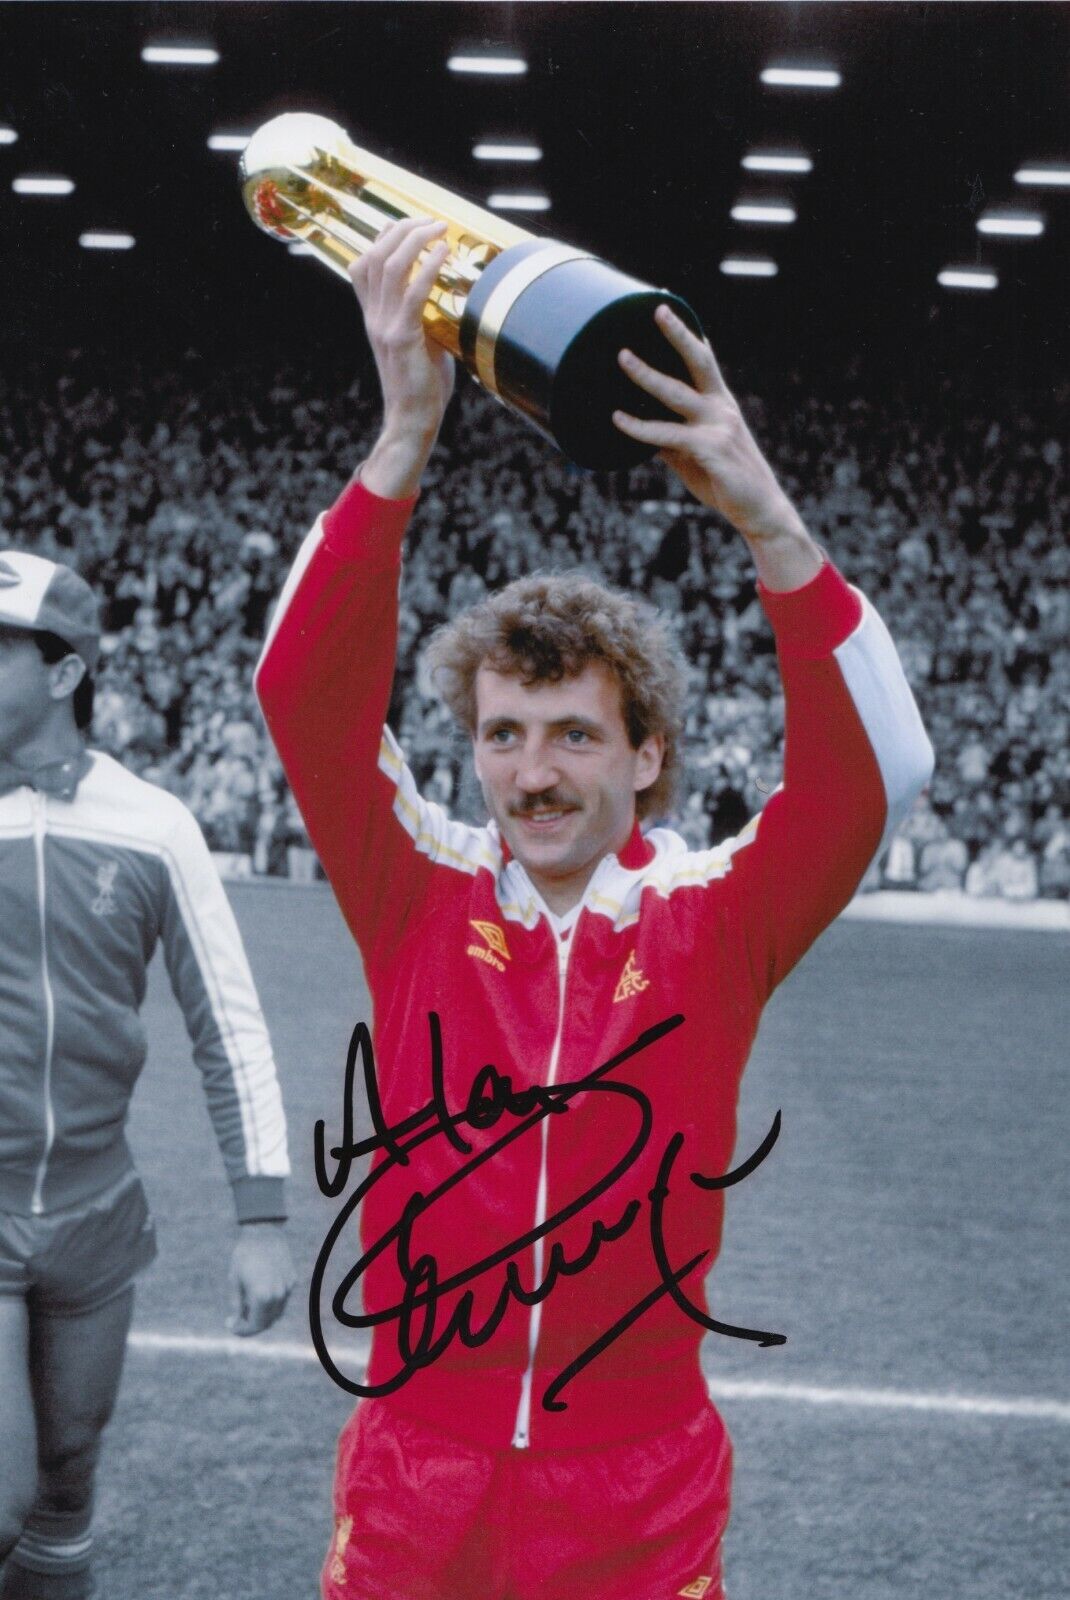 Alan Kennedy Hand Signed 12x8 Photo Poster painting - Liverpool - Football Autograph 3.